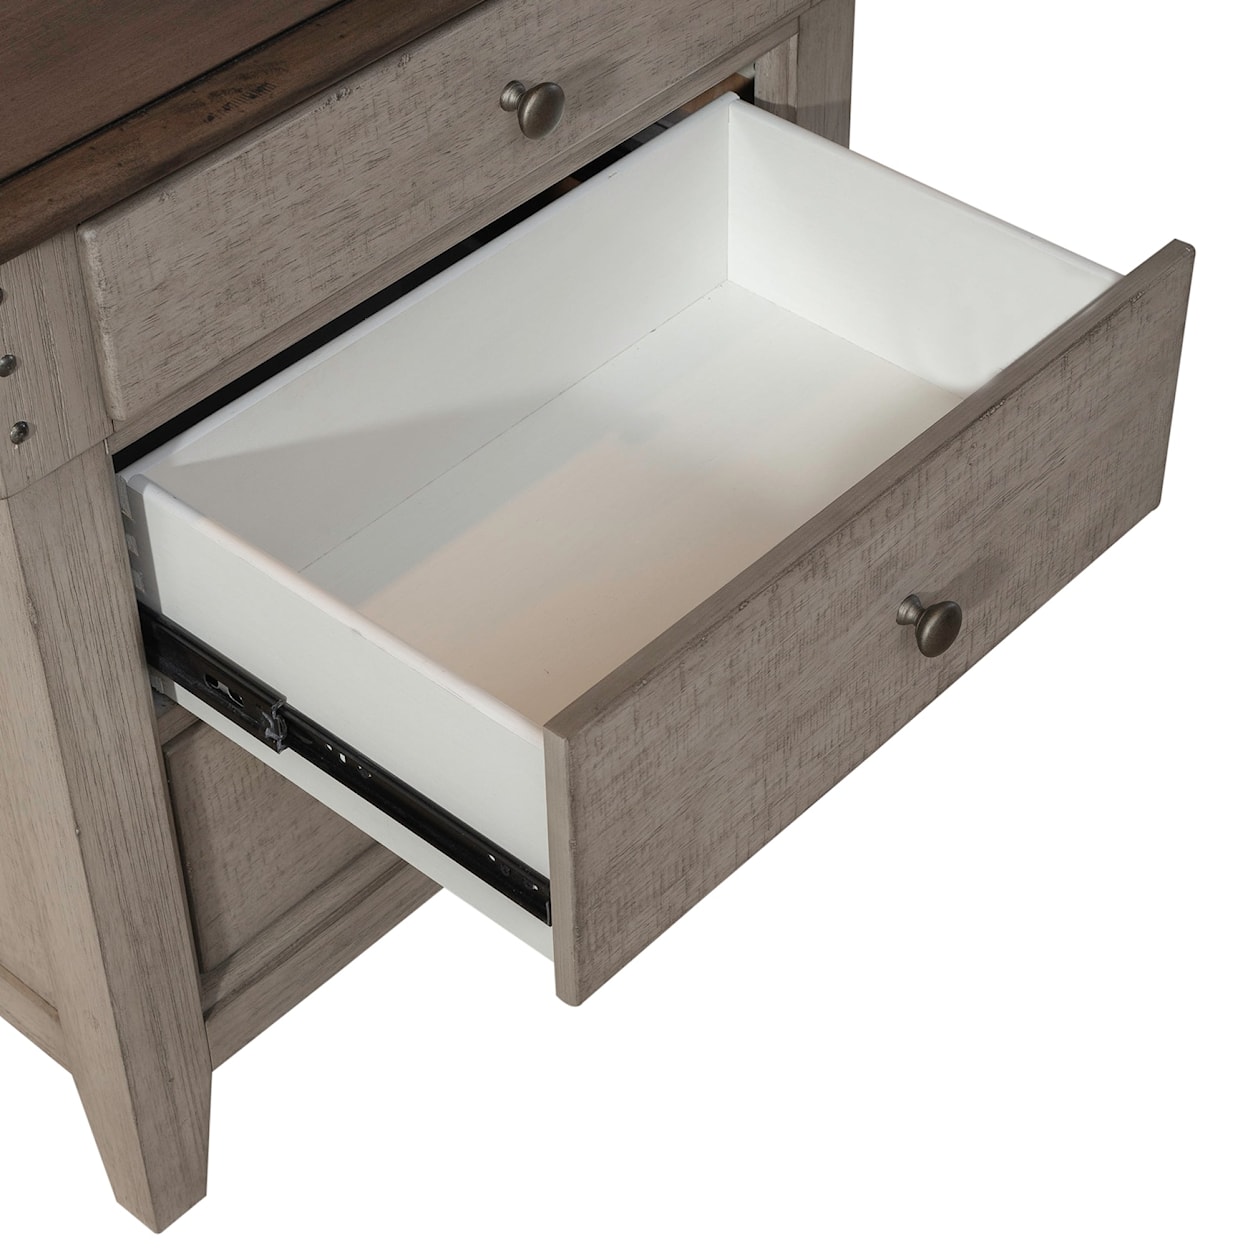 Liberty Furniture Ivy Hollow 3-Drawer Nightstand